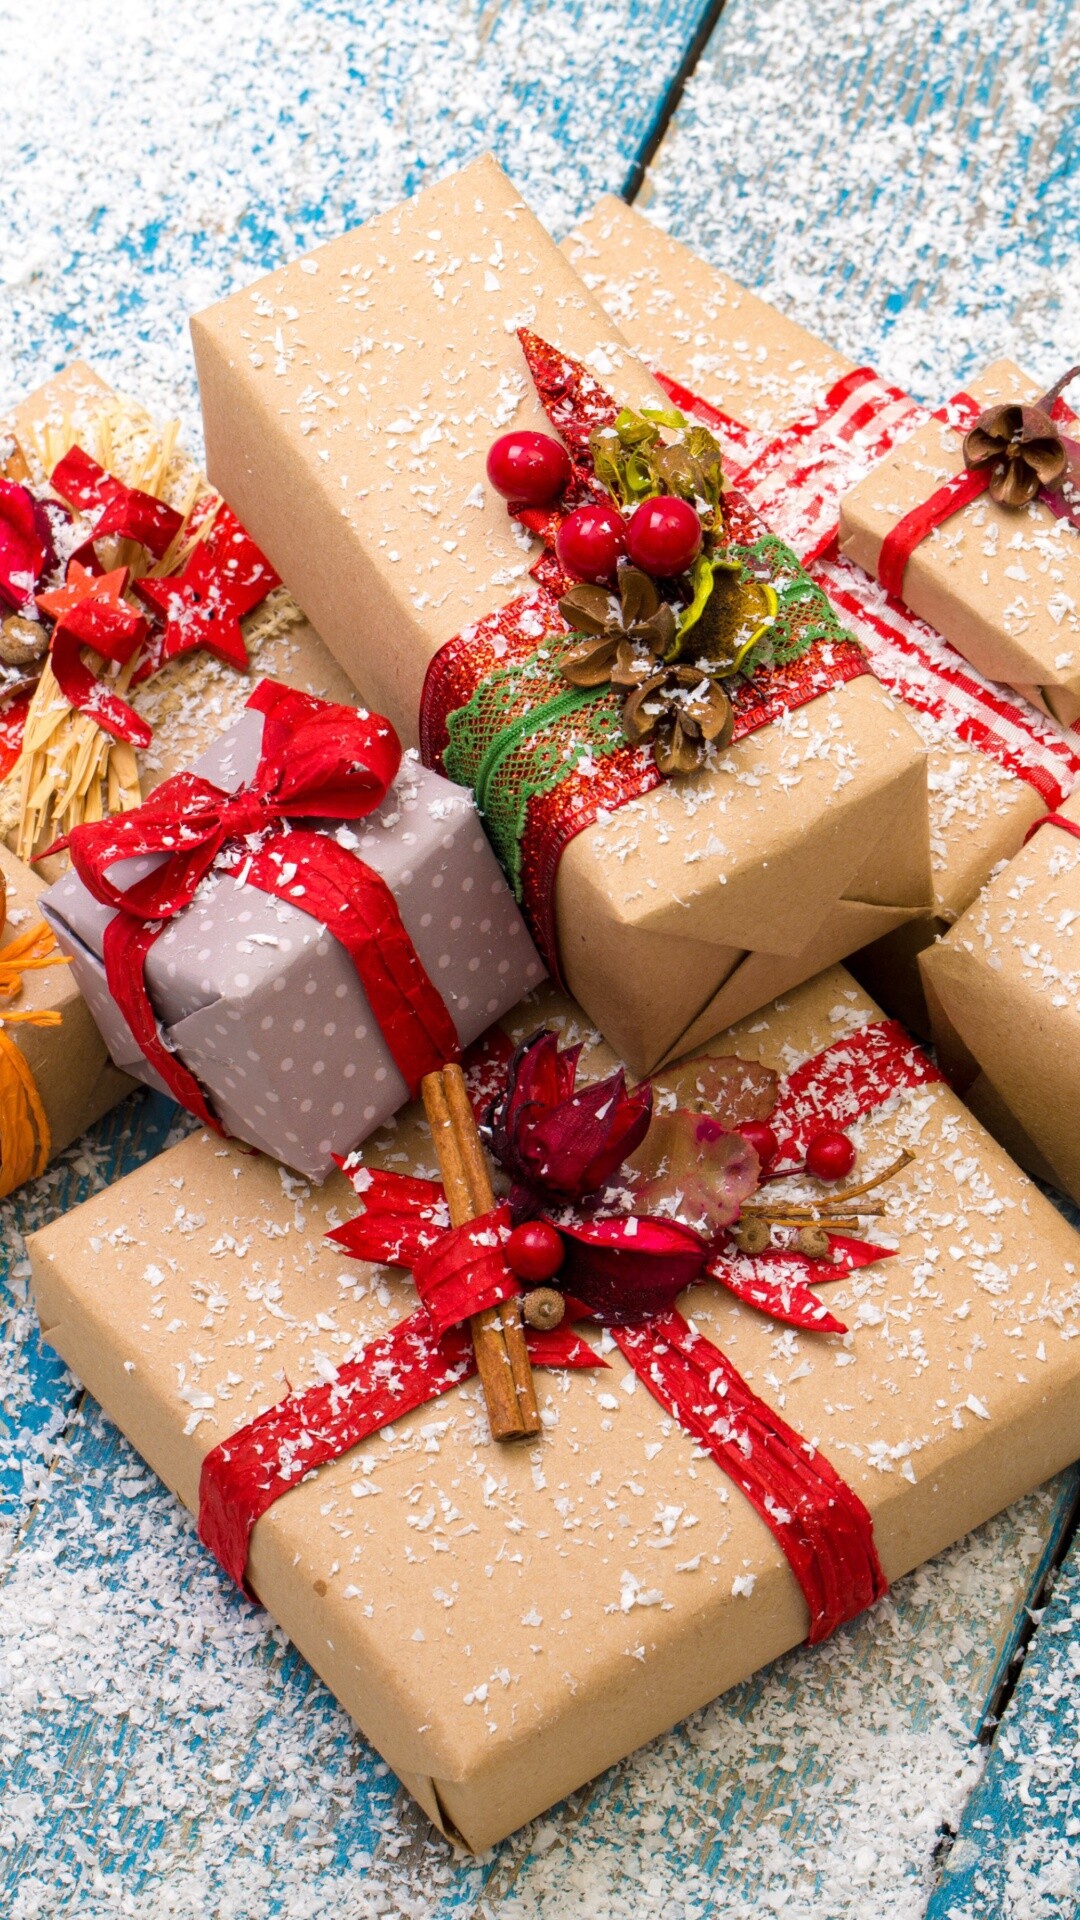 Christmas Gifts: Toys, Present wrapping, Sweetness, Santa Claus, Feast. 1080x1920 Full HD Wallpaper.